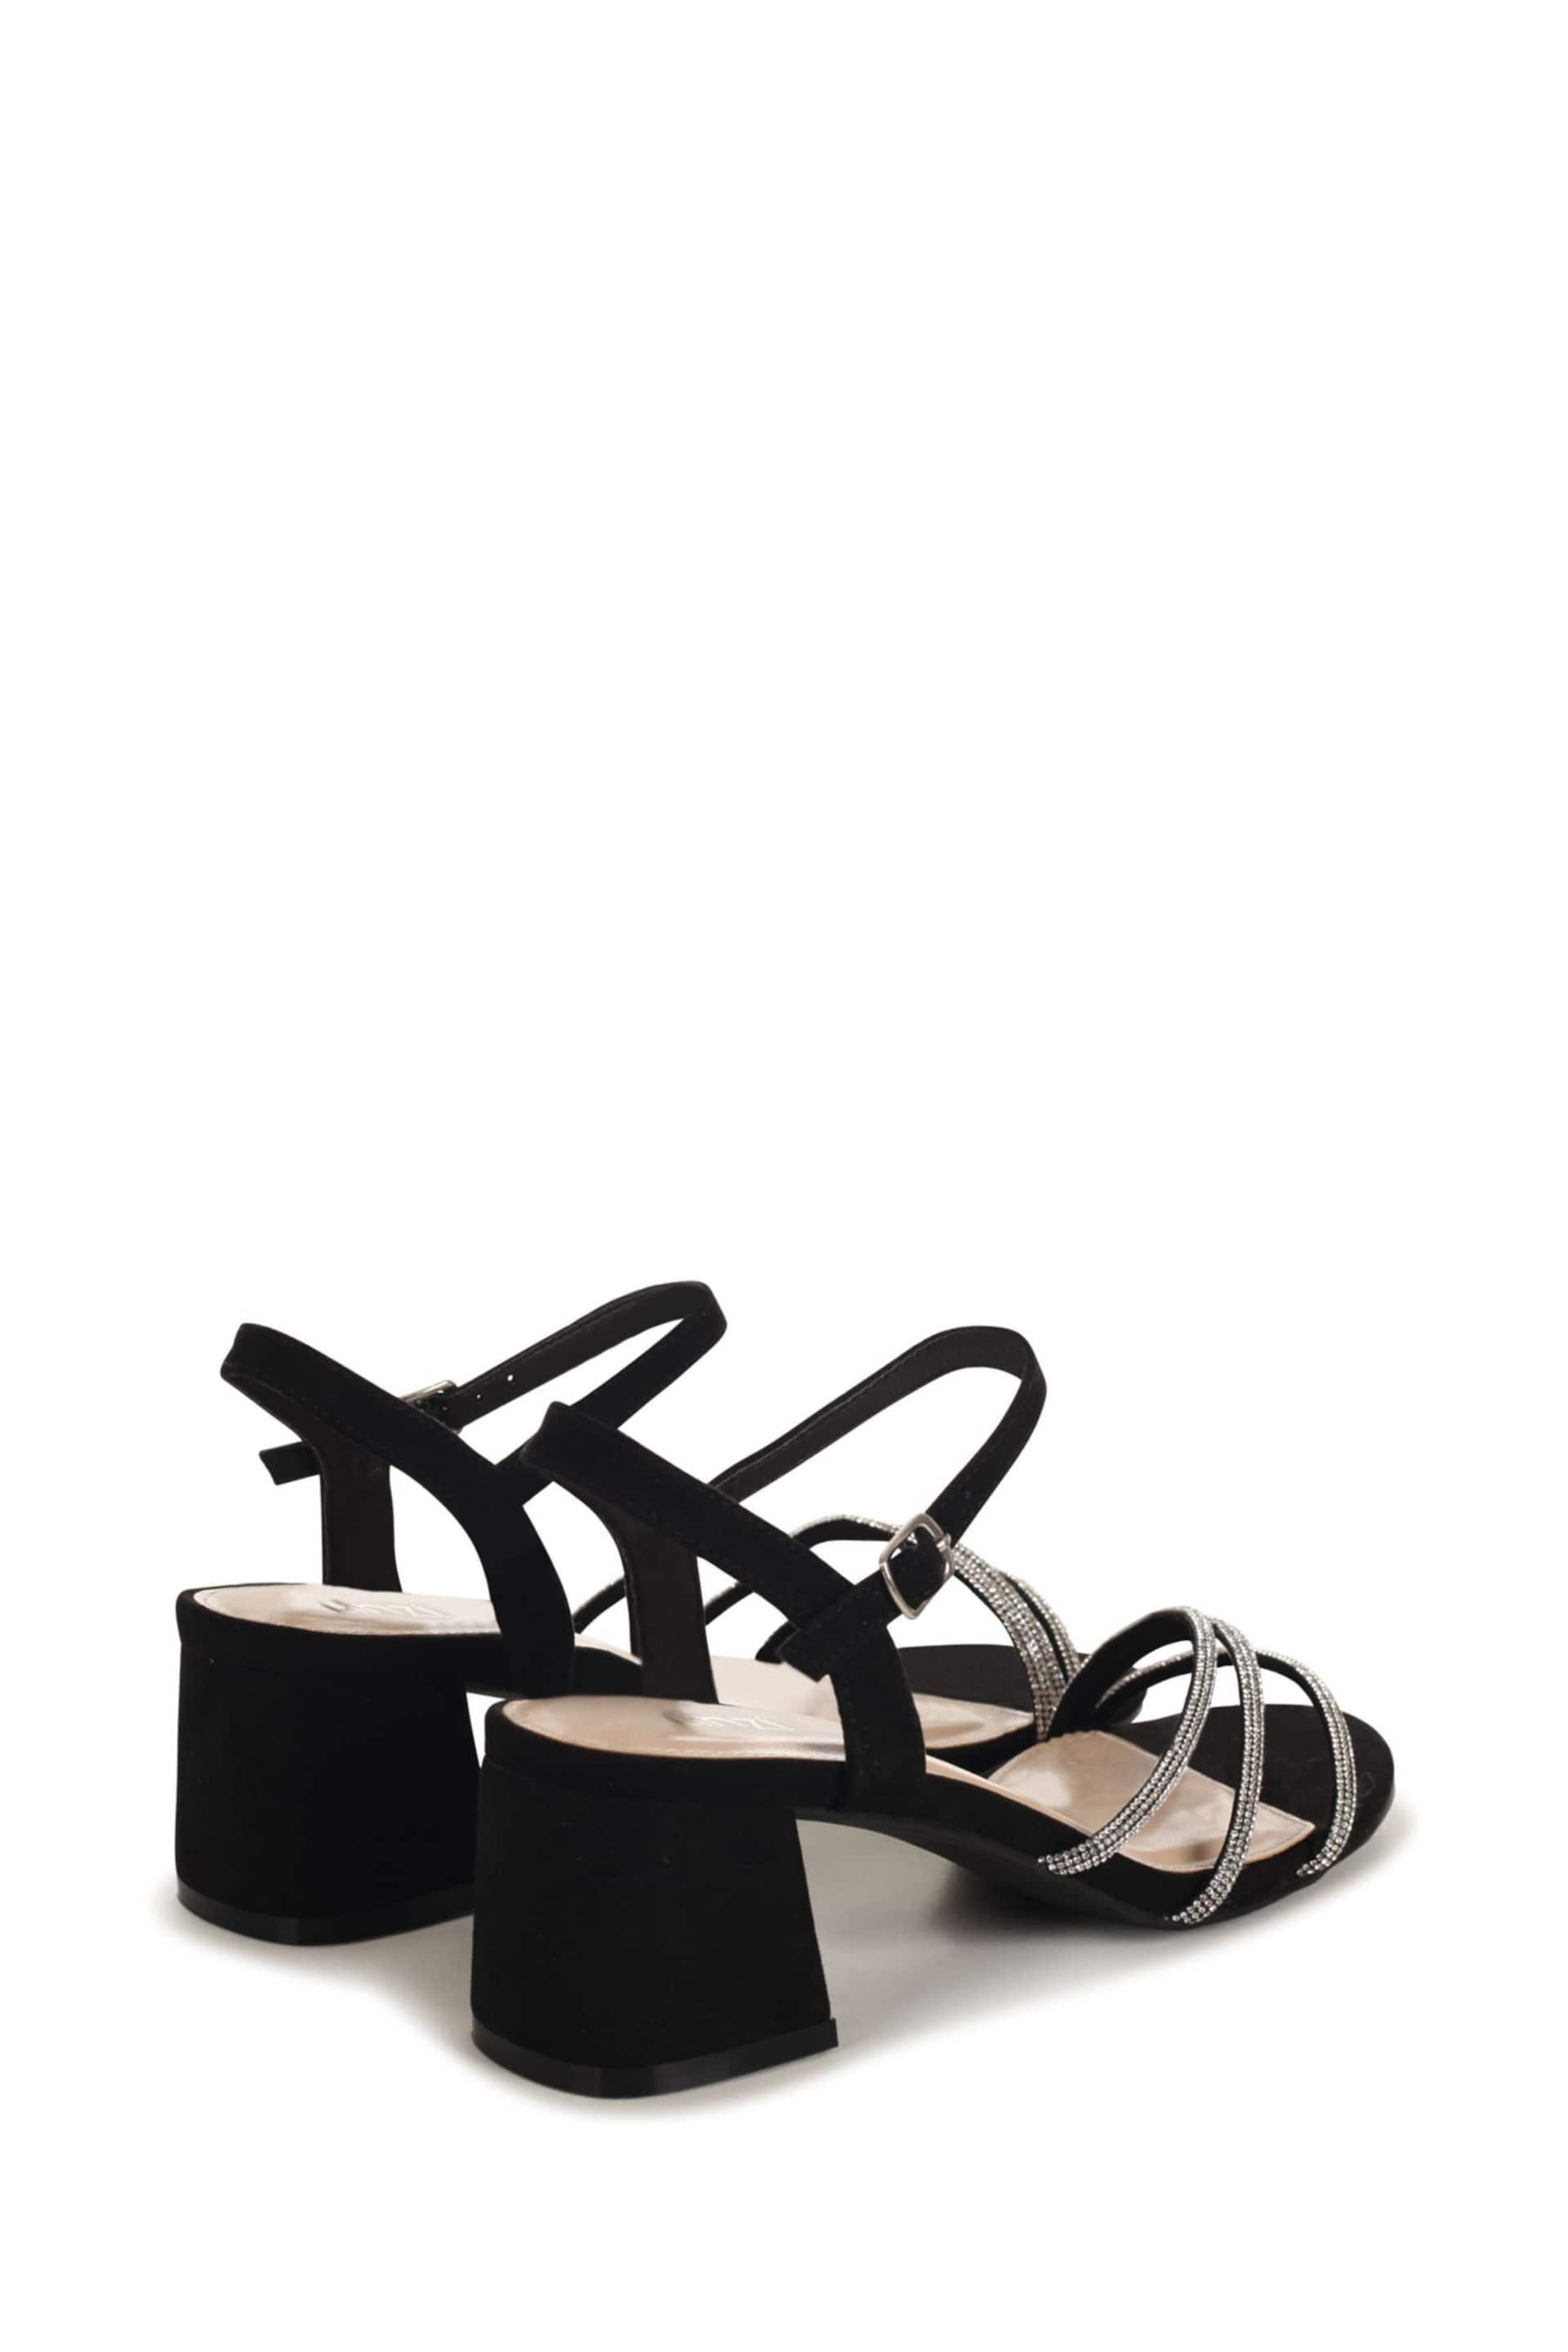 Linzi Black Carnation Low Block Heeled Sandal With Diamante Front Straps - Image 4 of 4